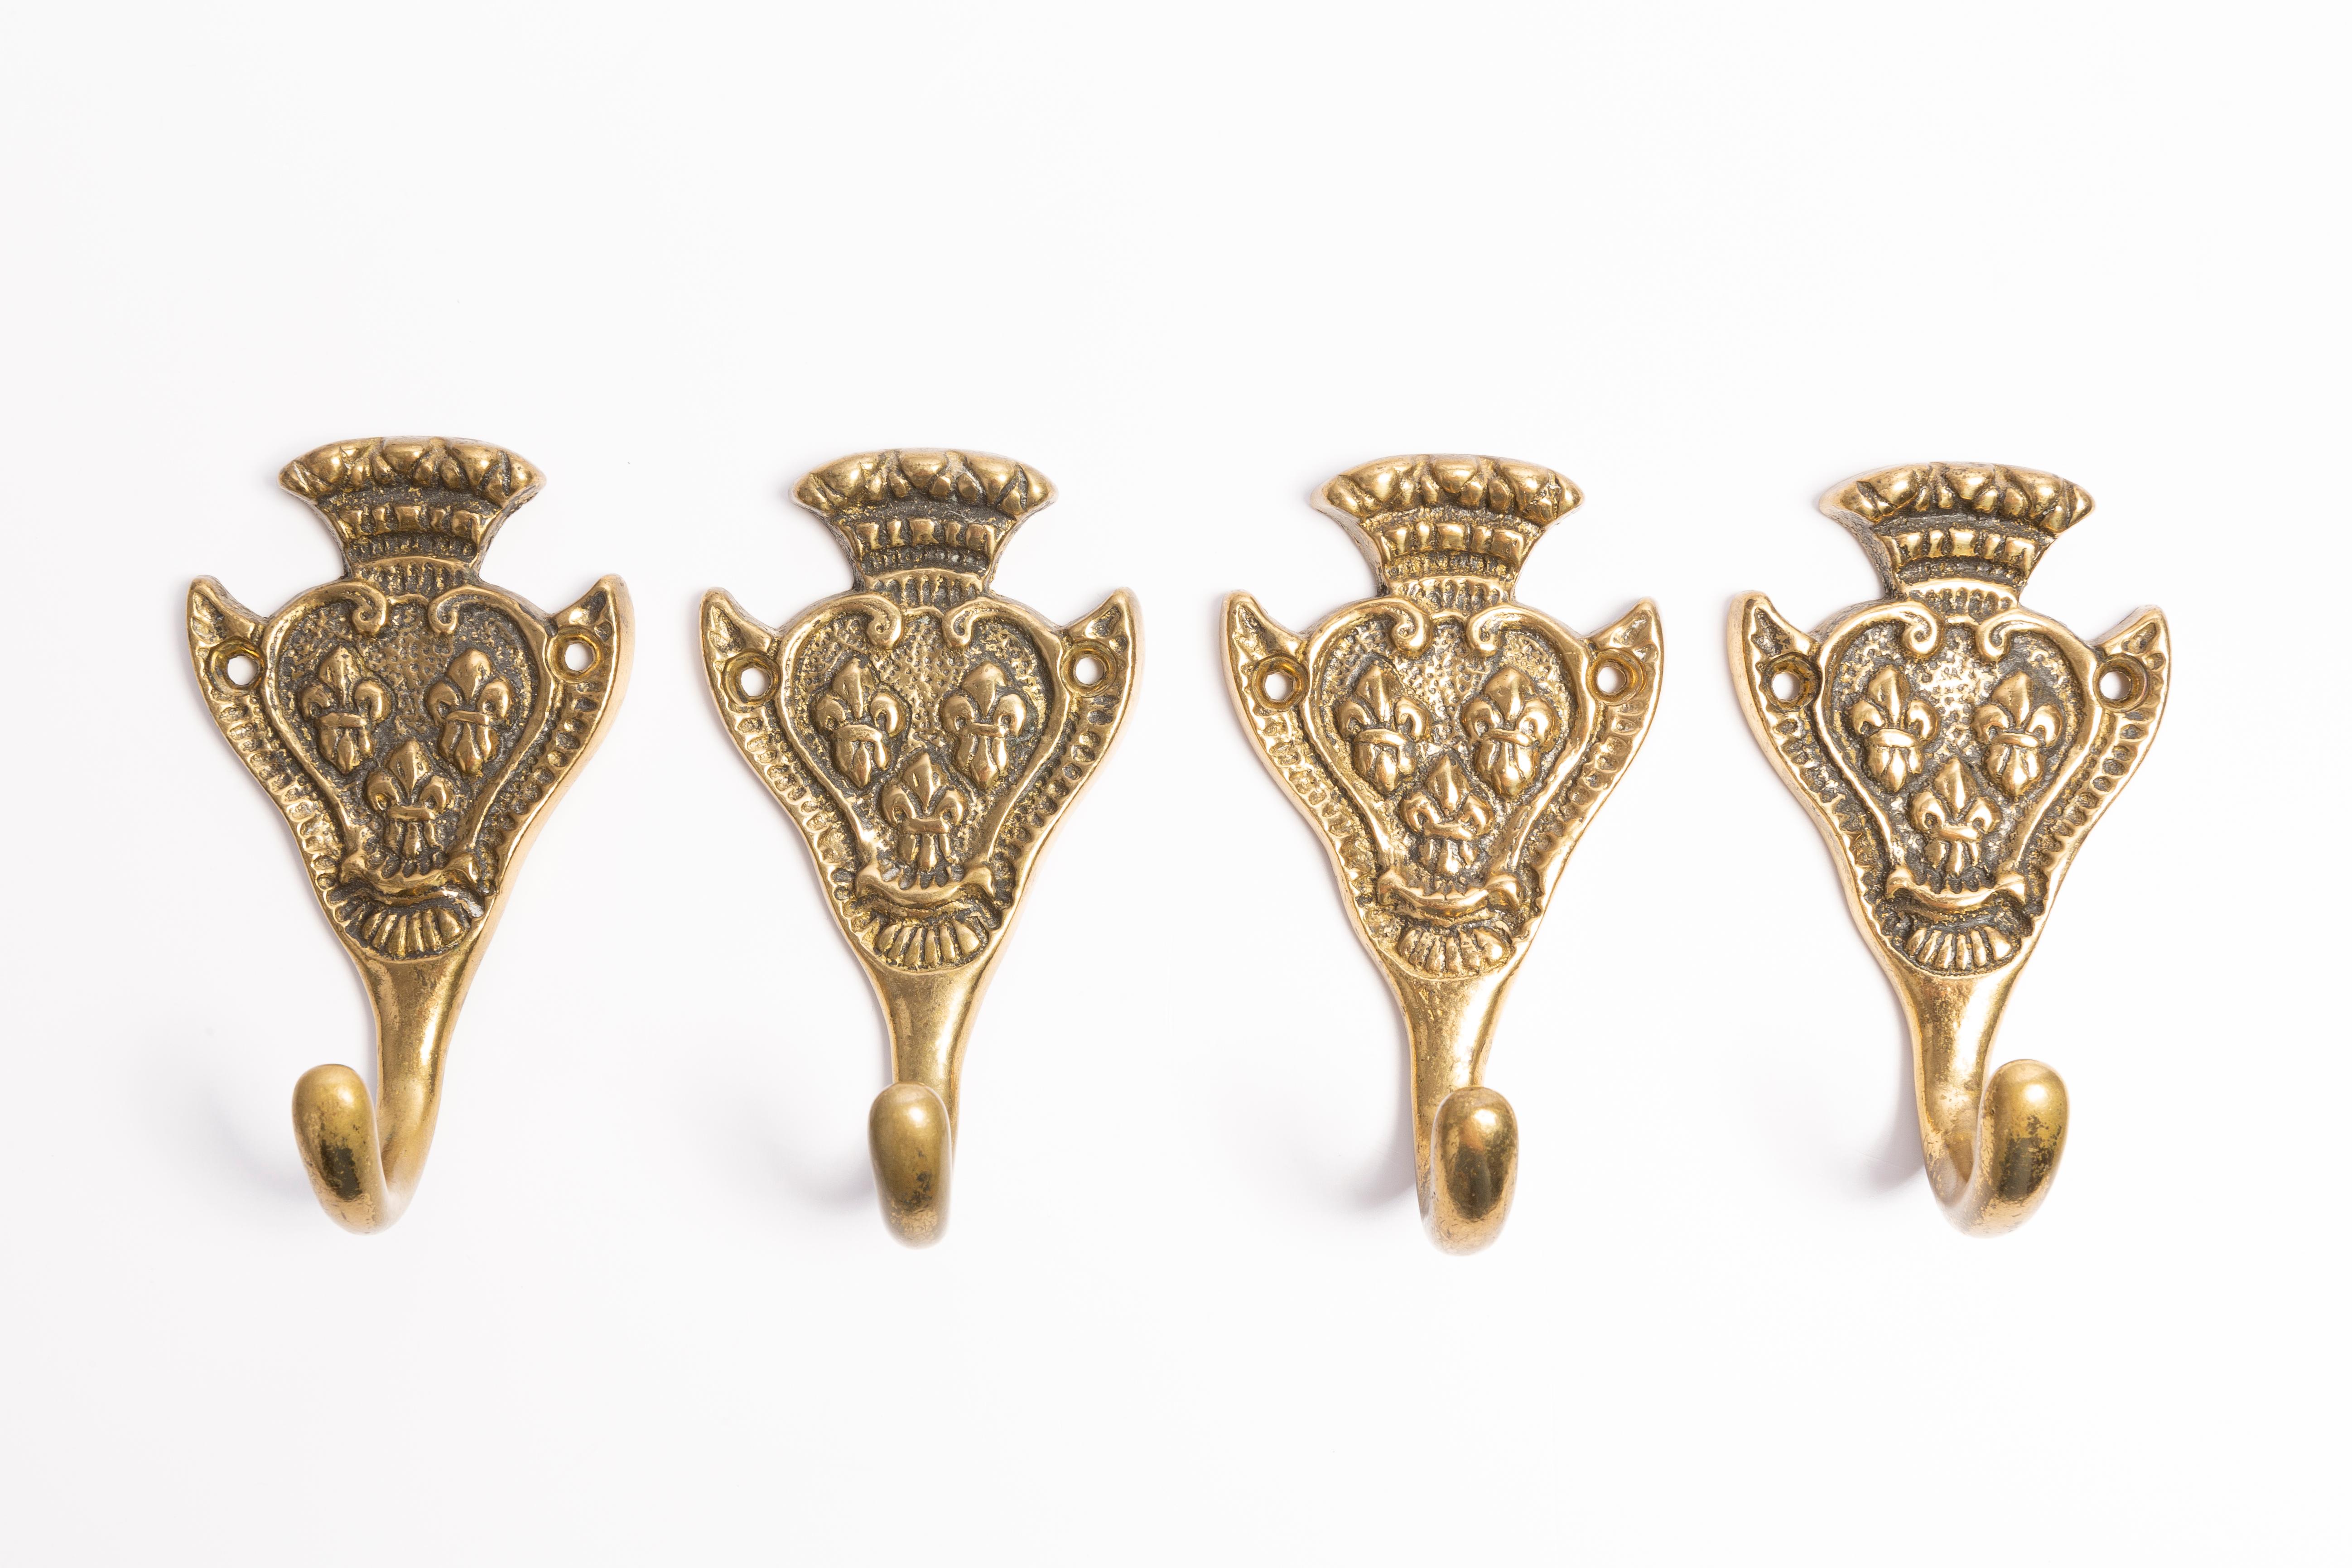 Set of four beautiful vintage wall decorative hangers, gold painted. Made in Italy in 1960s. Only one unique set.